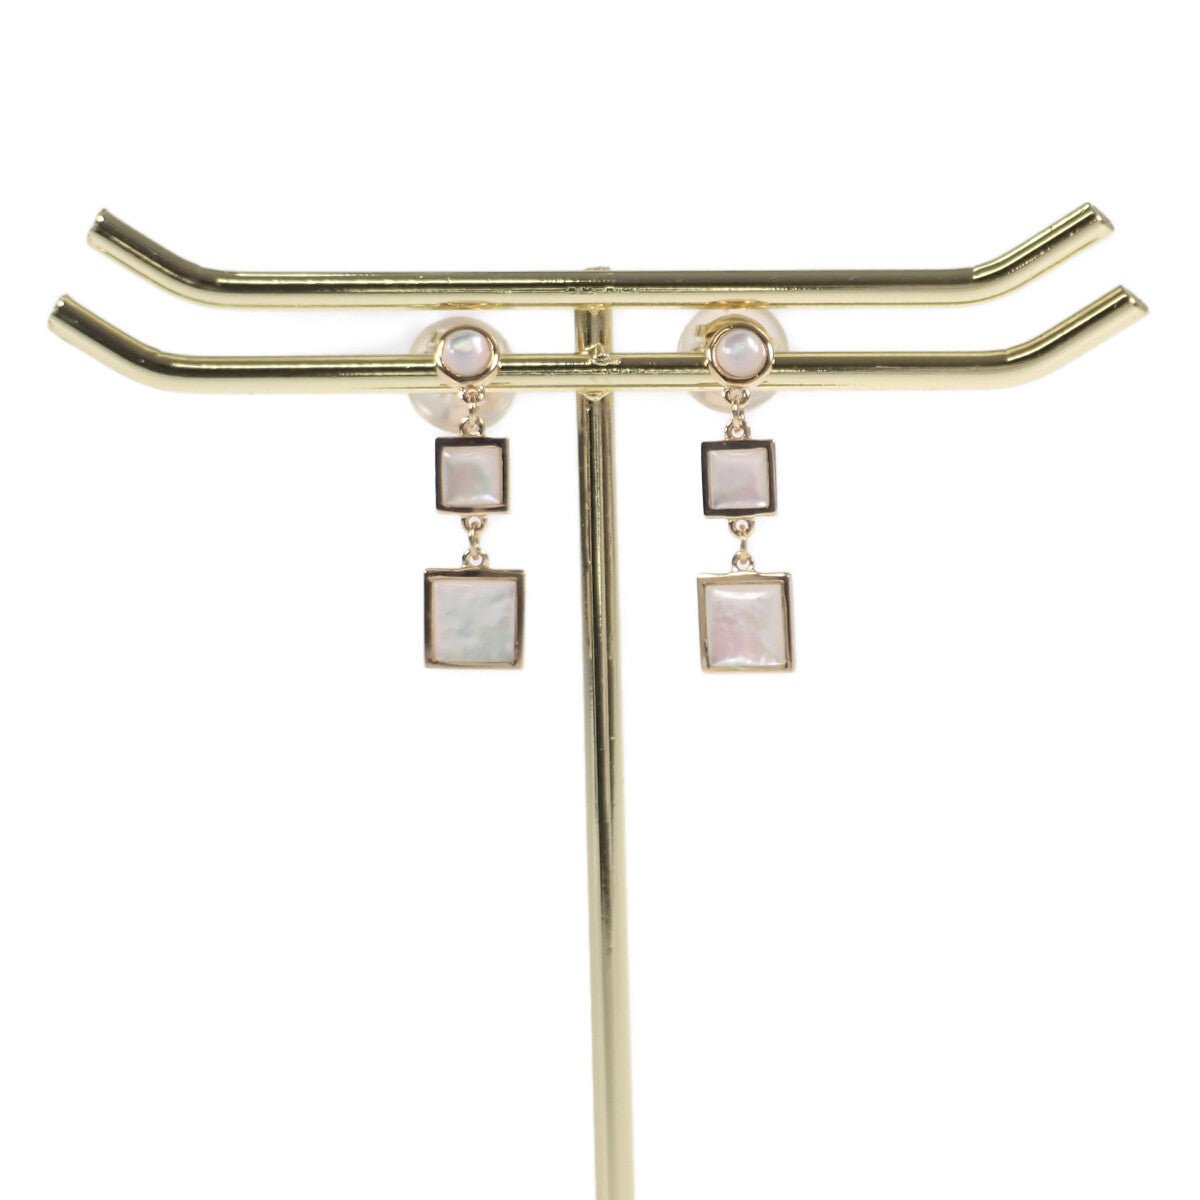 [LuxUness]  K18 Yellow Gold, Onyx & Shell Square Design Earrings for Women - New & Unused in Brand new